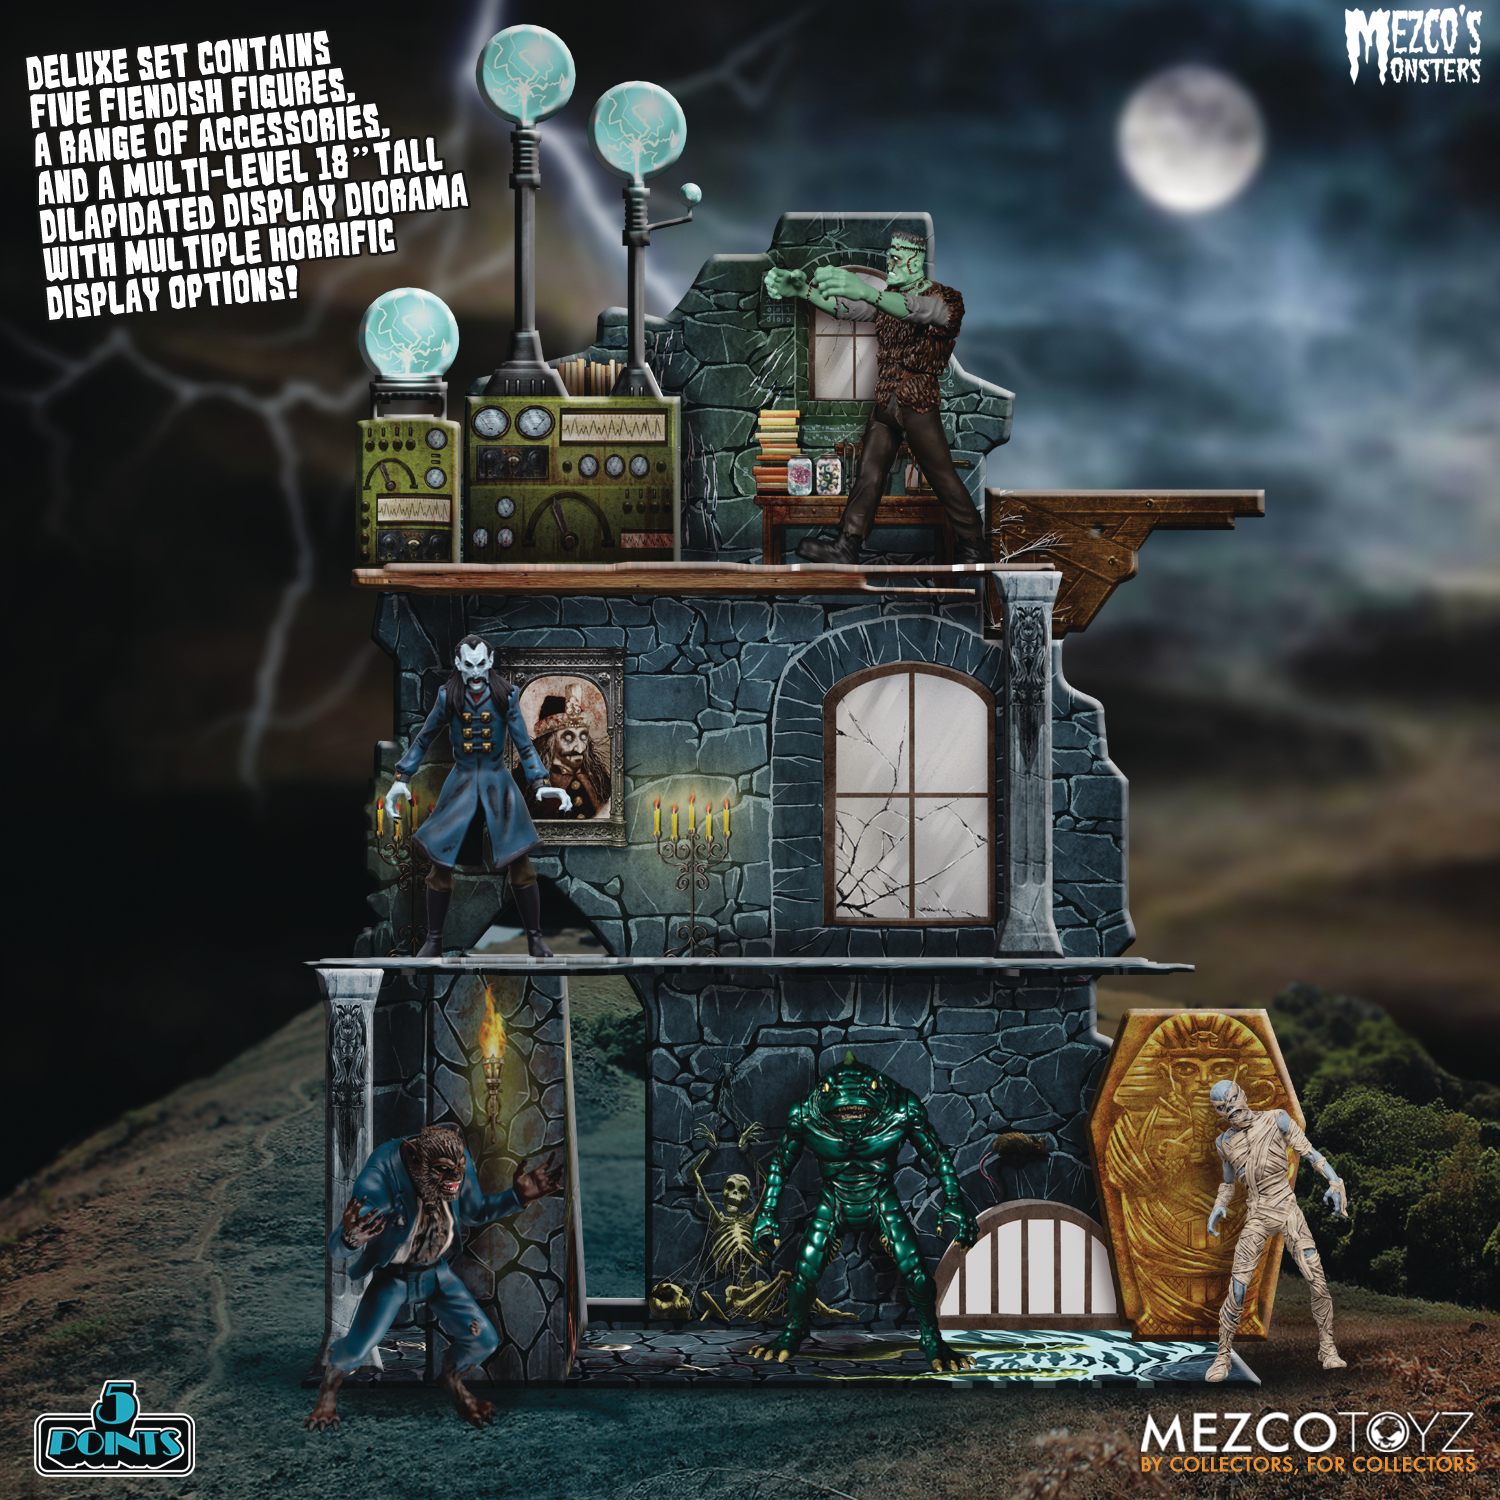 5 Points Mezcos Monsters Tower of Fear Deluxe Boxed Set